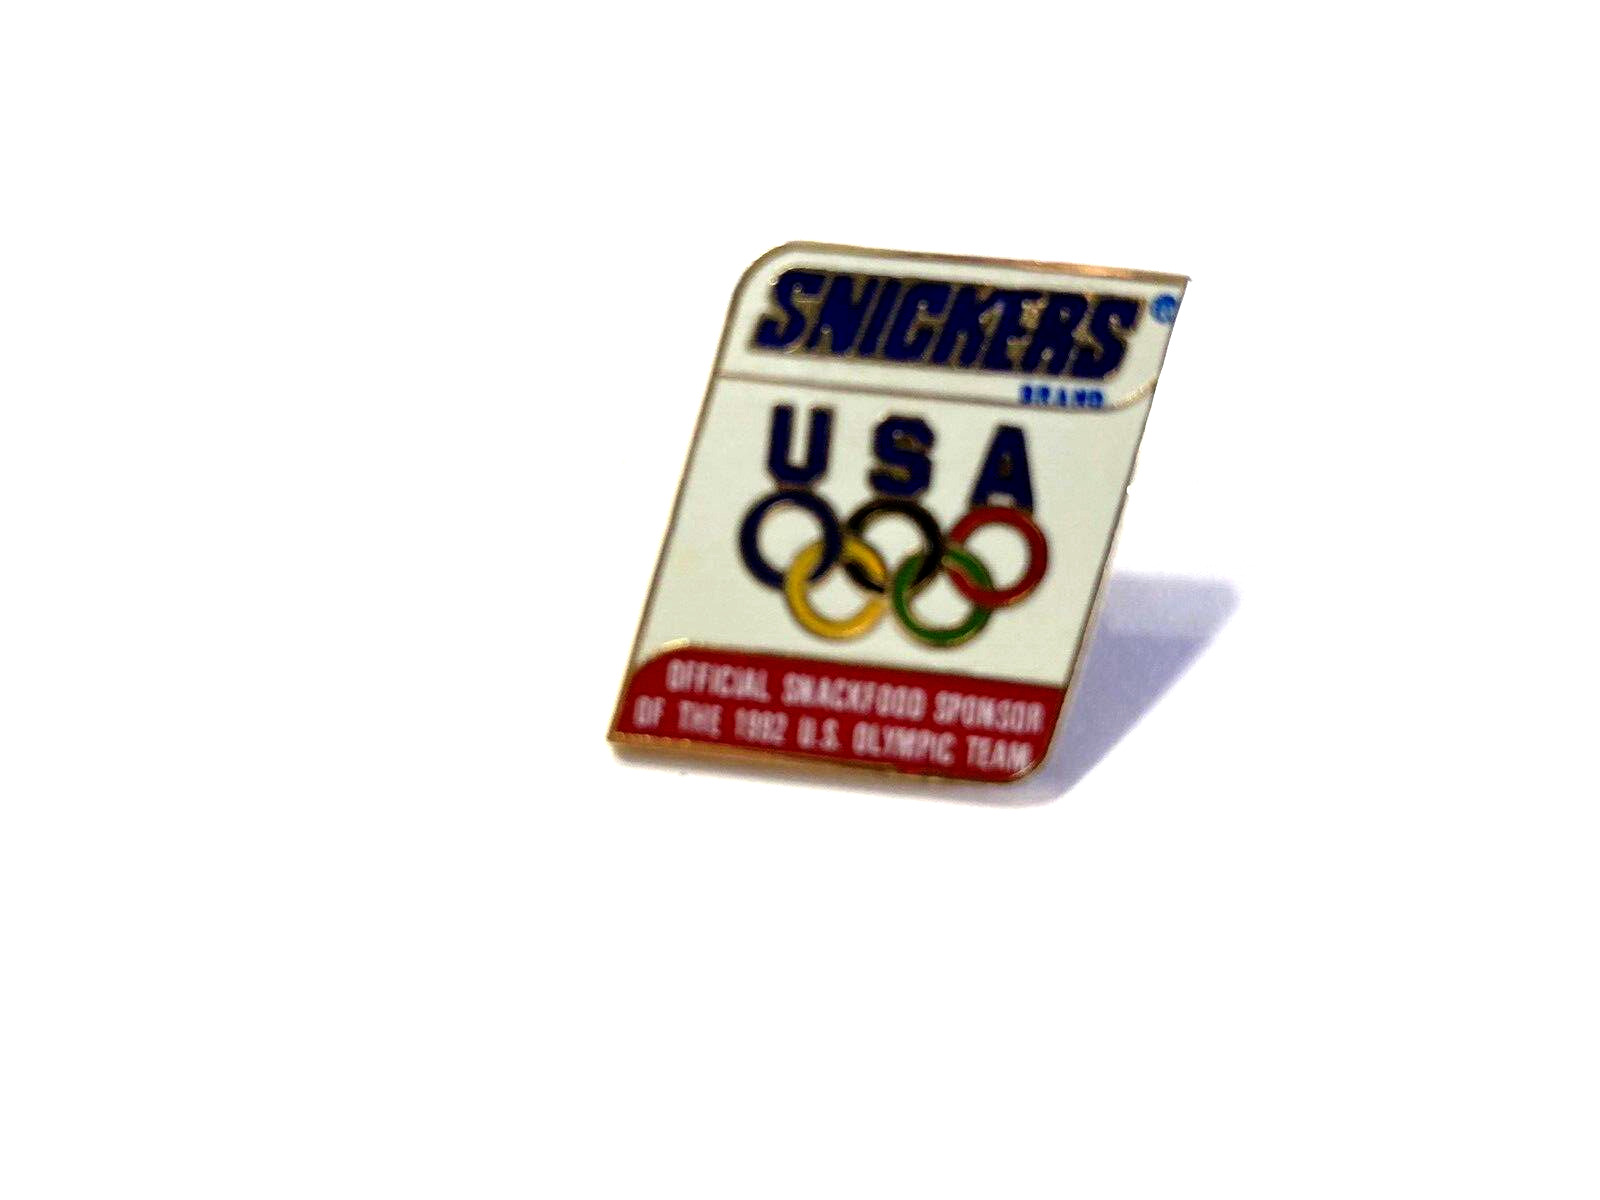 Snickers USA 1992 Olympic Games Sponsor Pin